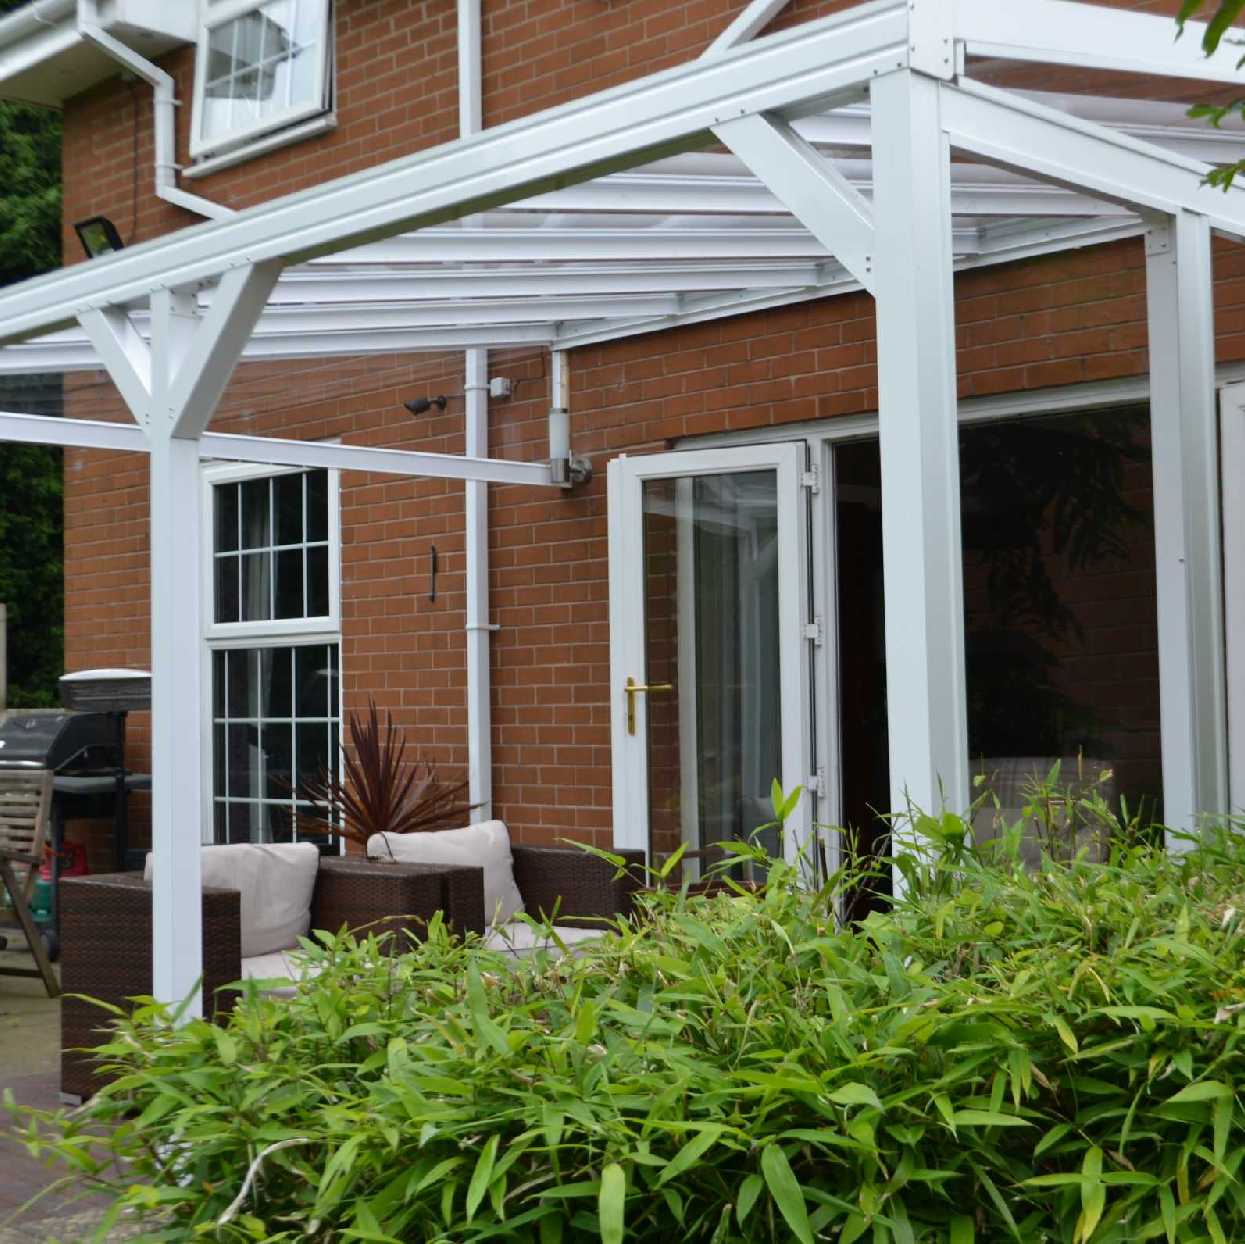 Omega Smart Lean-To Canopy, White UNGLAZED for 6mm Glazing - 7.7m (W) x 2.0m (P), (4) Supporting Posts from Omega Build